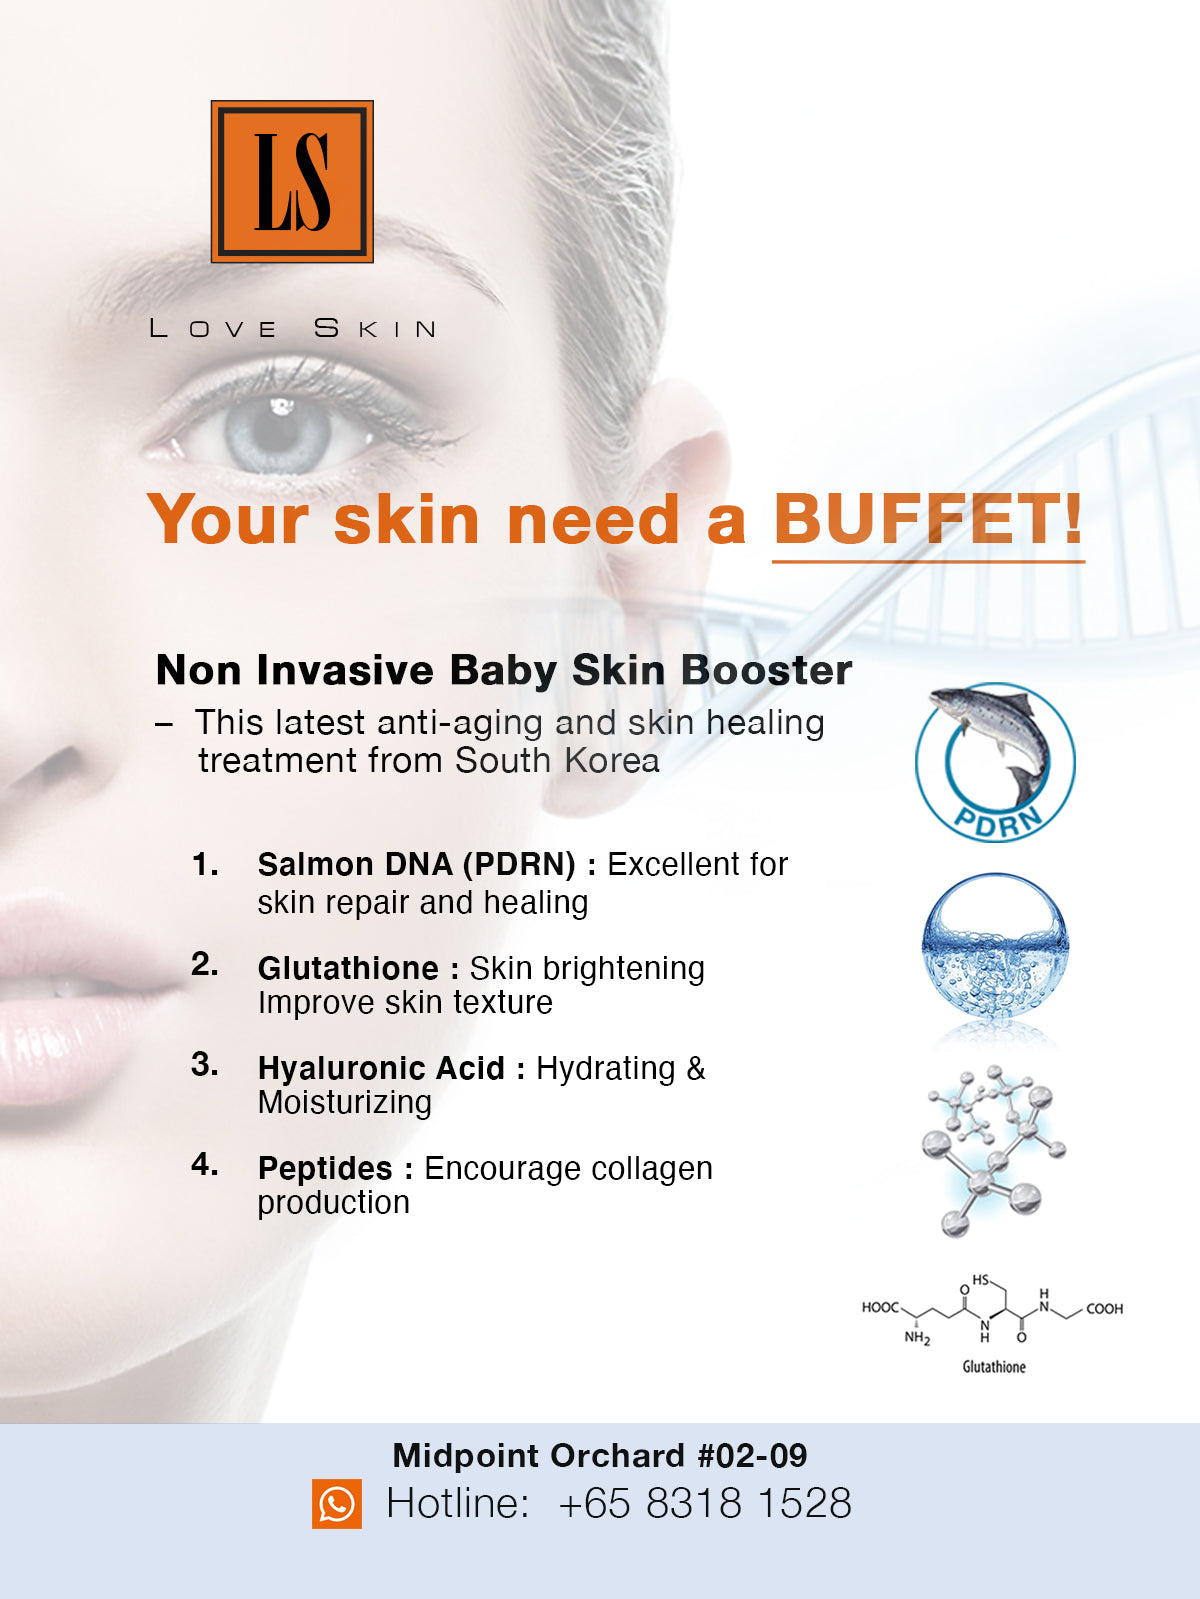 [S190018-75] Non Invasive Baby Skin Booster Facial Treatment - Salmon DNA (PDRN), Hyaluronic Acid, Glutathione, and Peptides